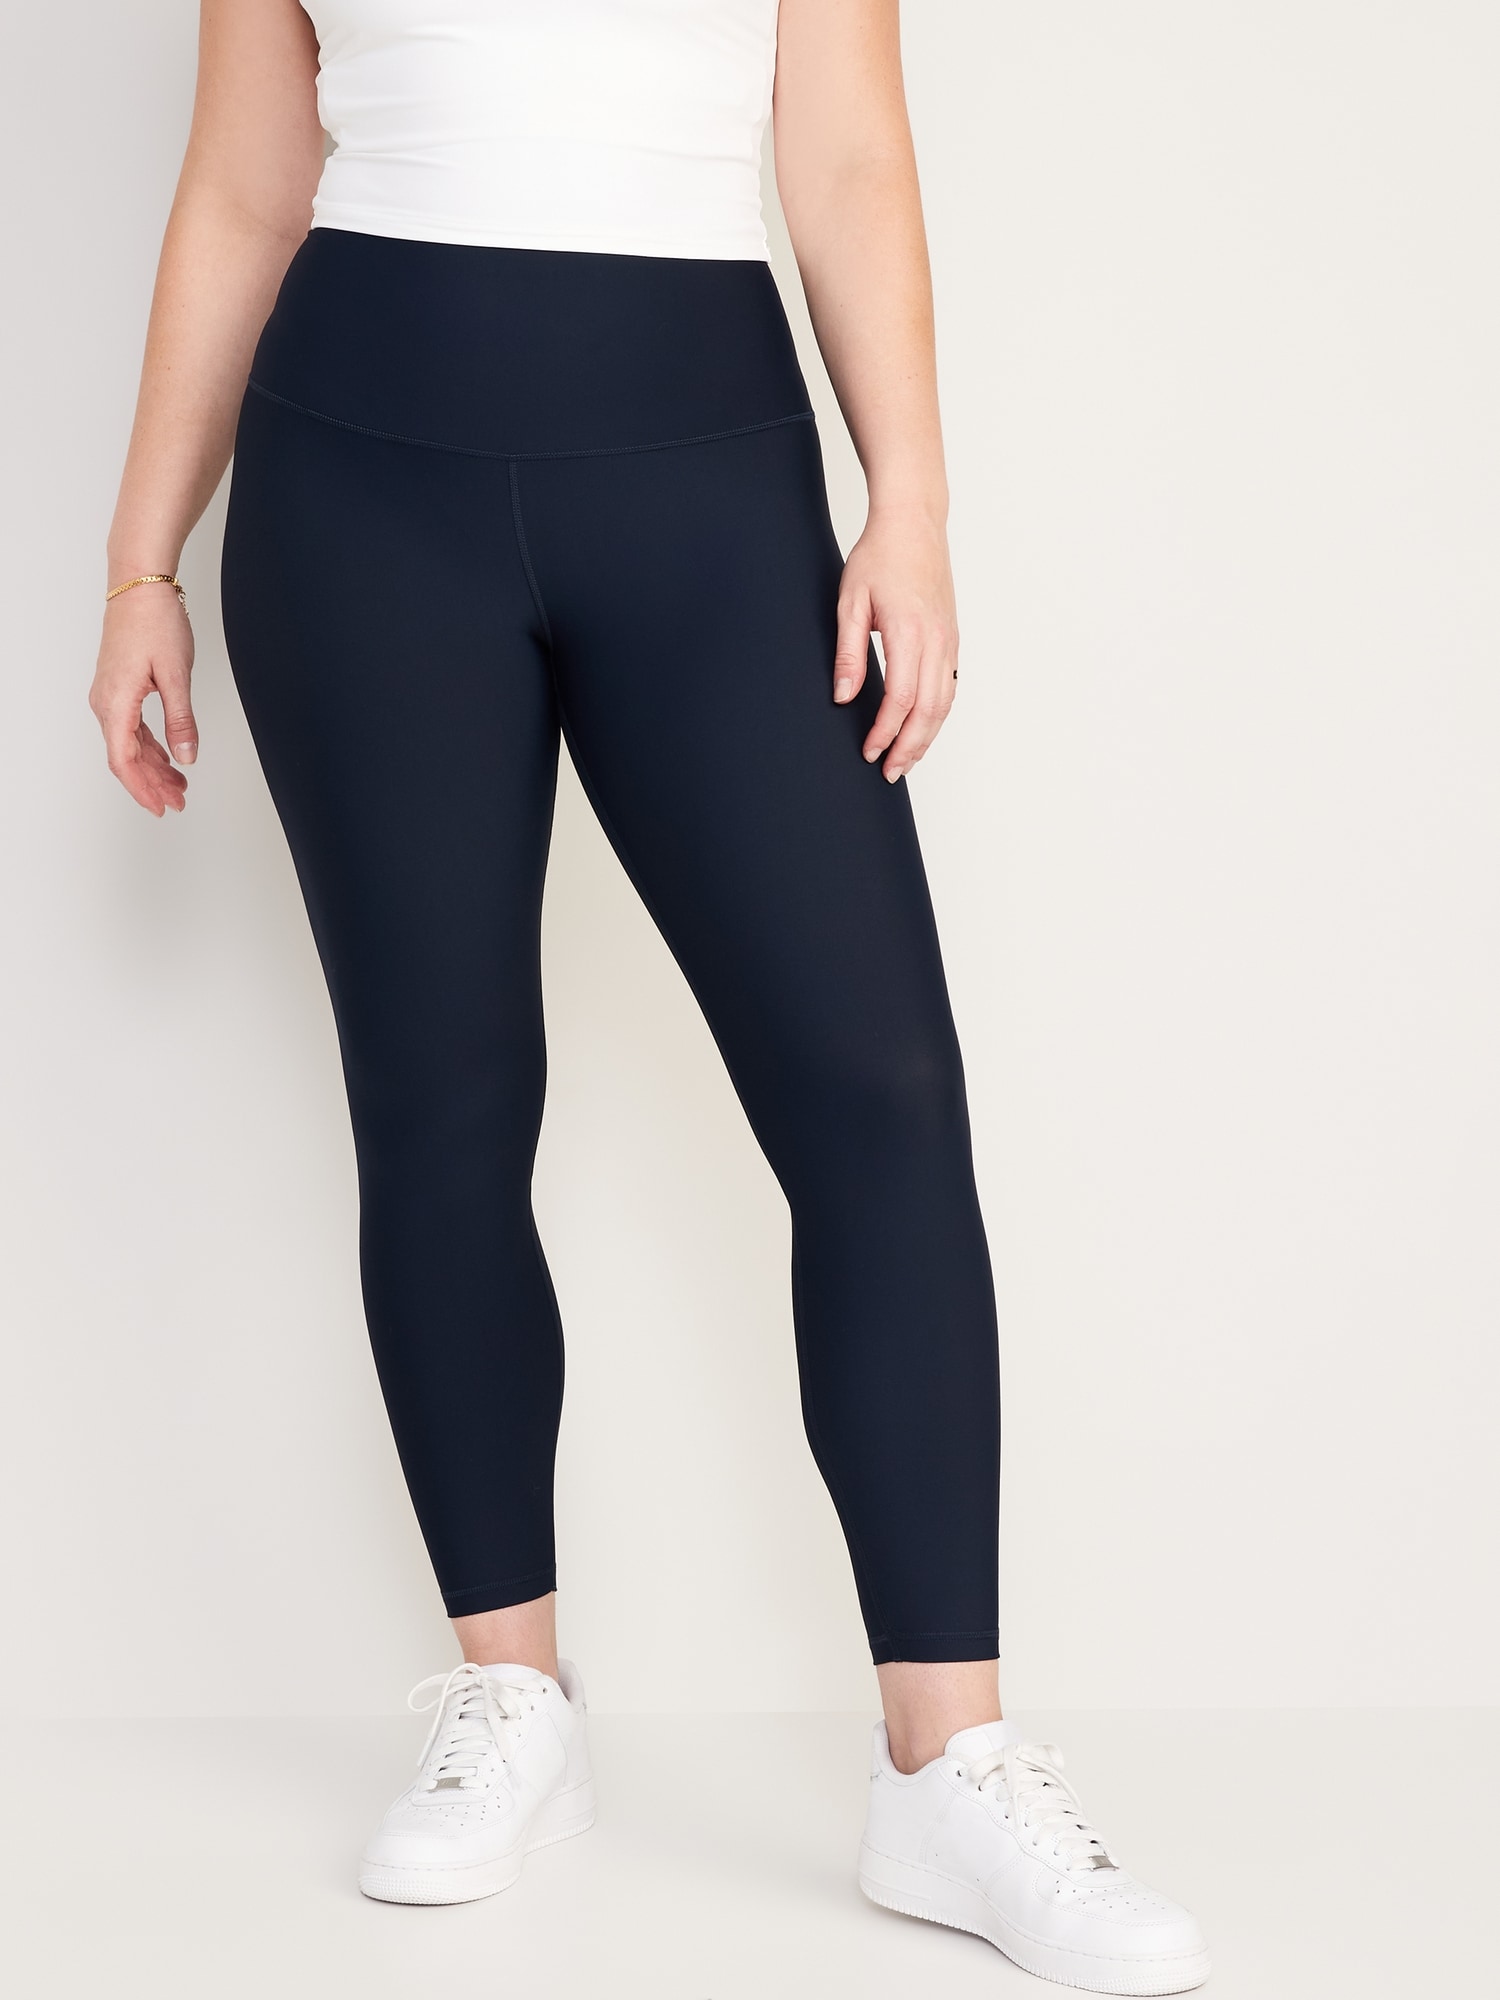 Old Navy Active Powersoft Extra High Rise Go Dry Leggings Black Tie Dye  Size S - $19 New With Tags - From Taylor